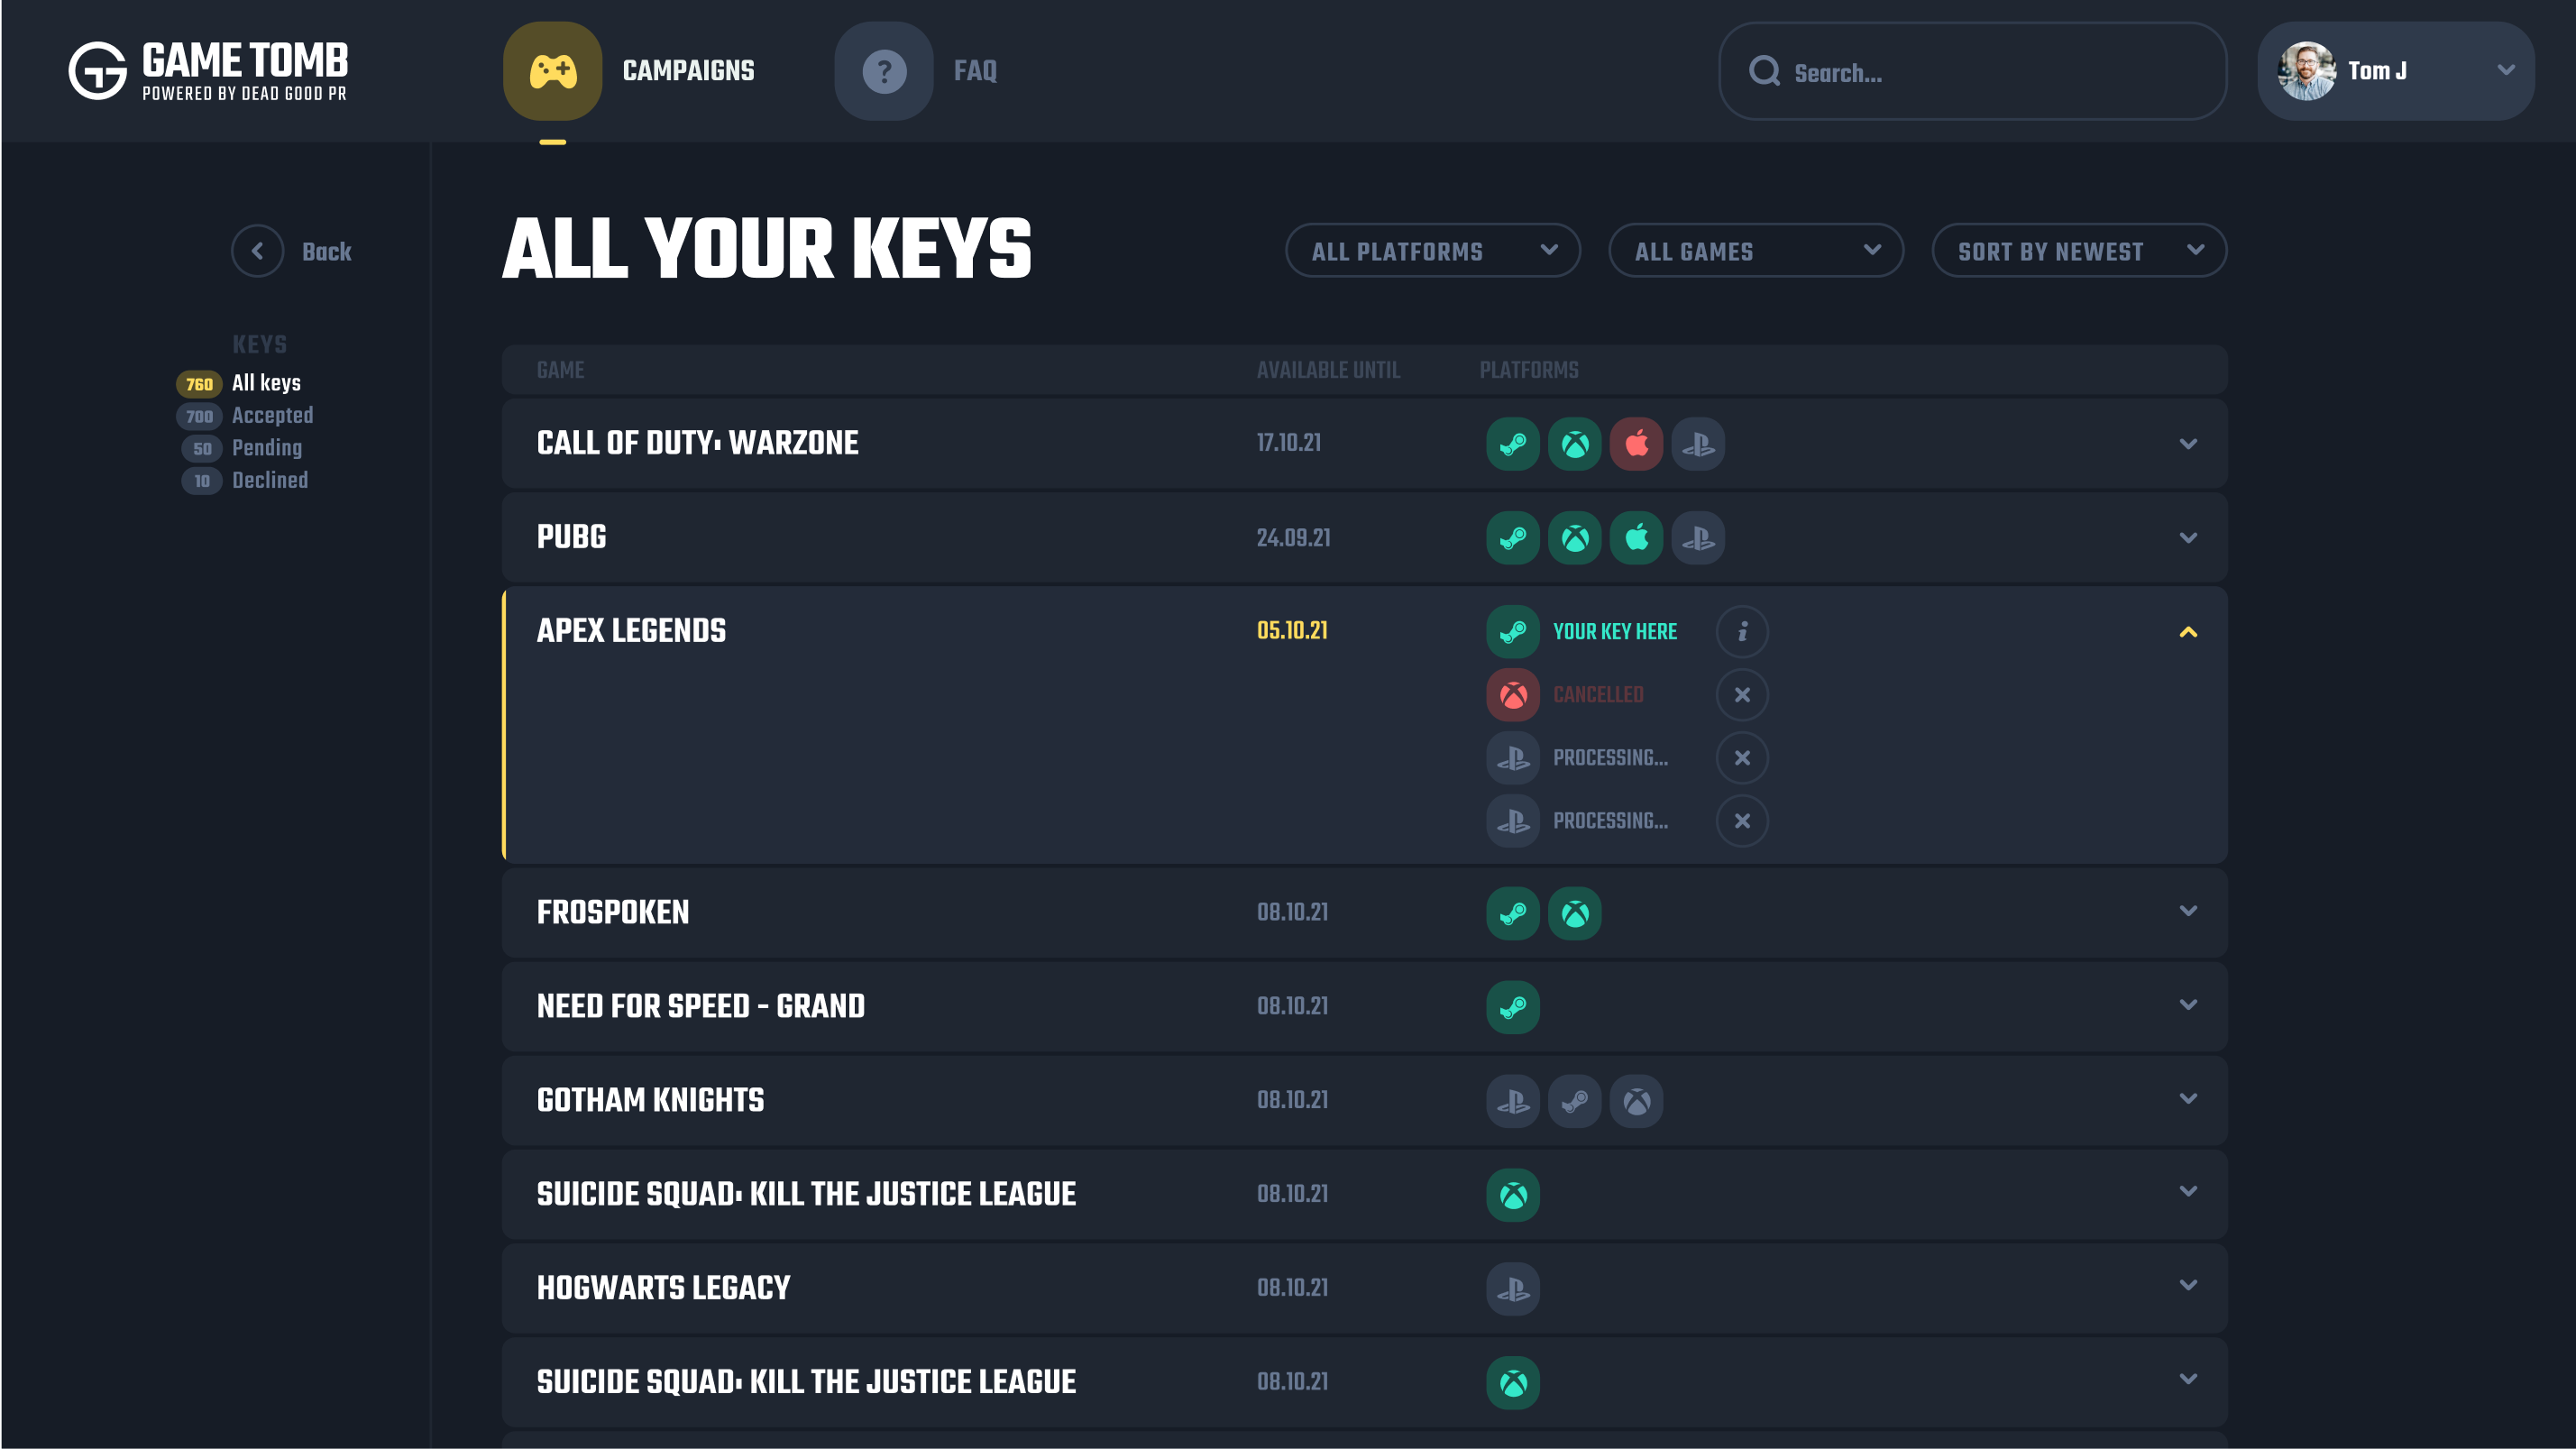 A screen showing all the keys a user has access to